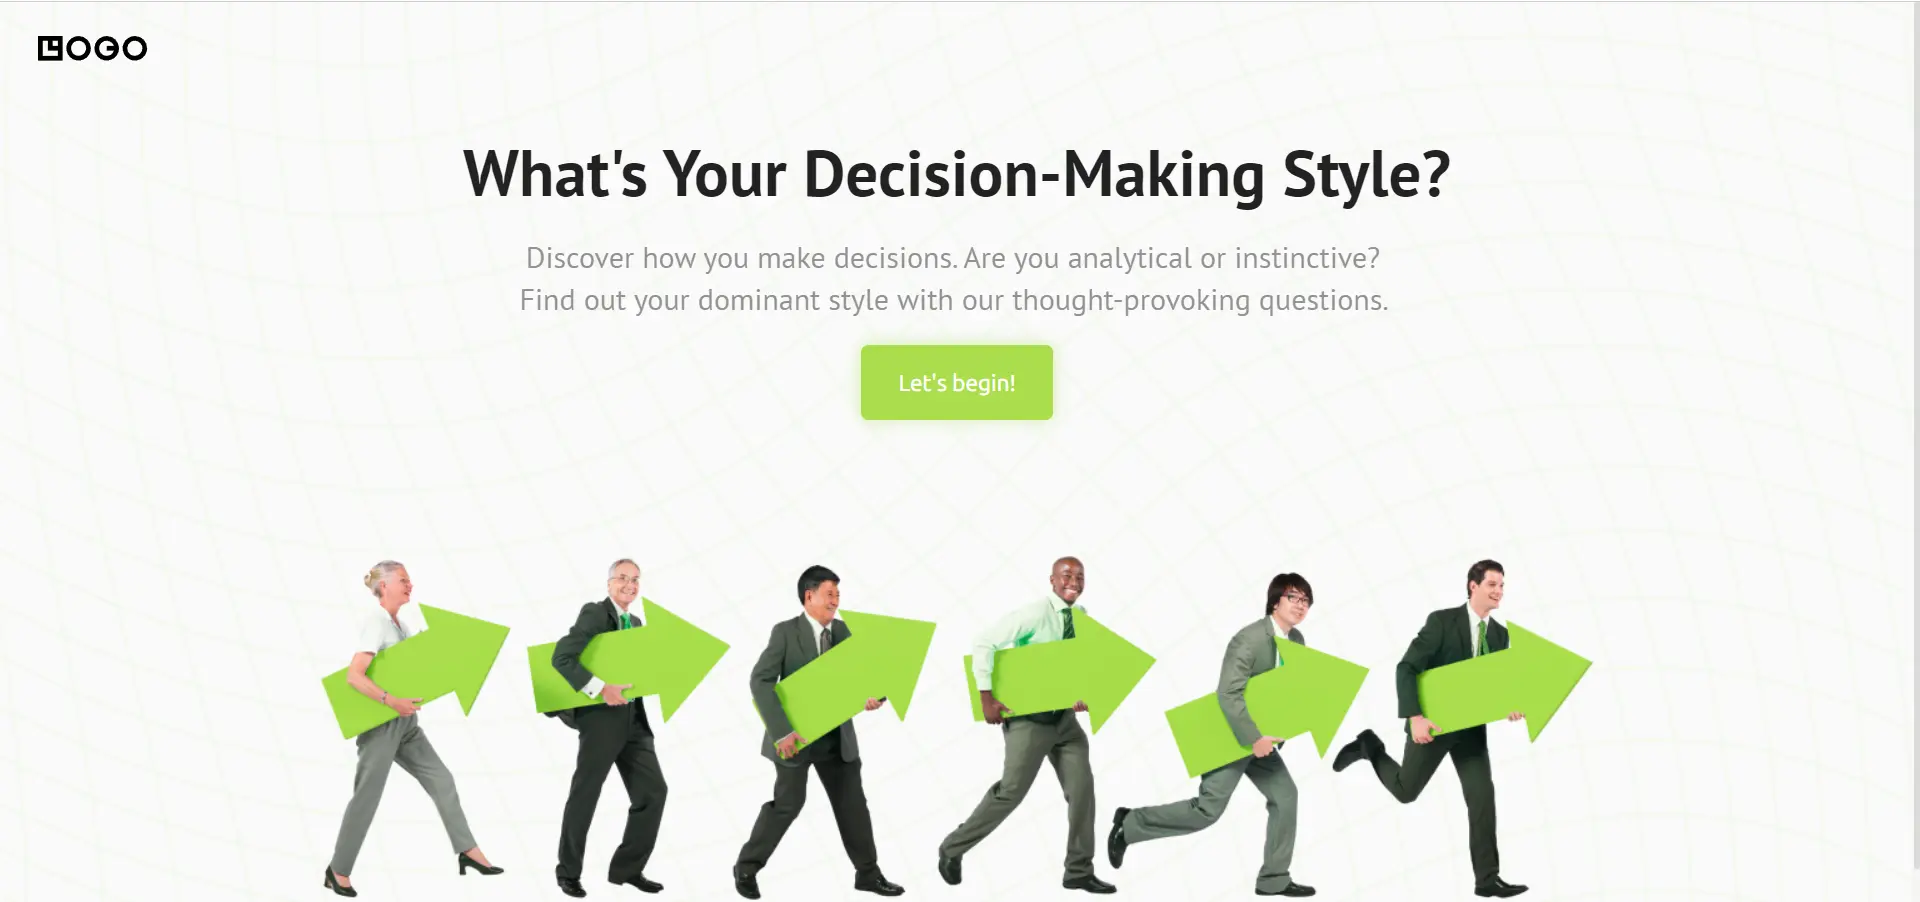 Whats Your Decision-Making Style